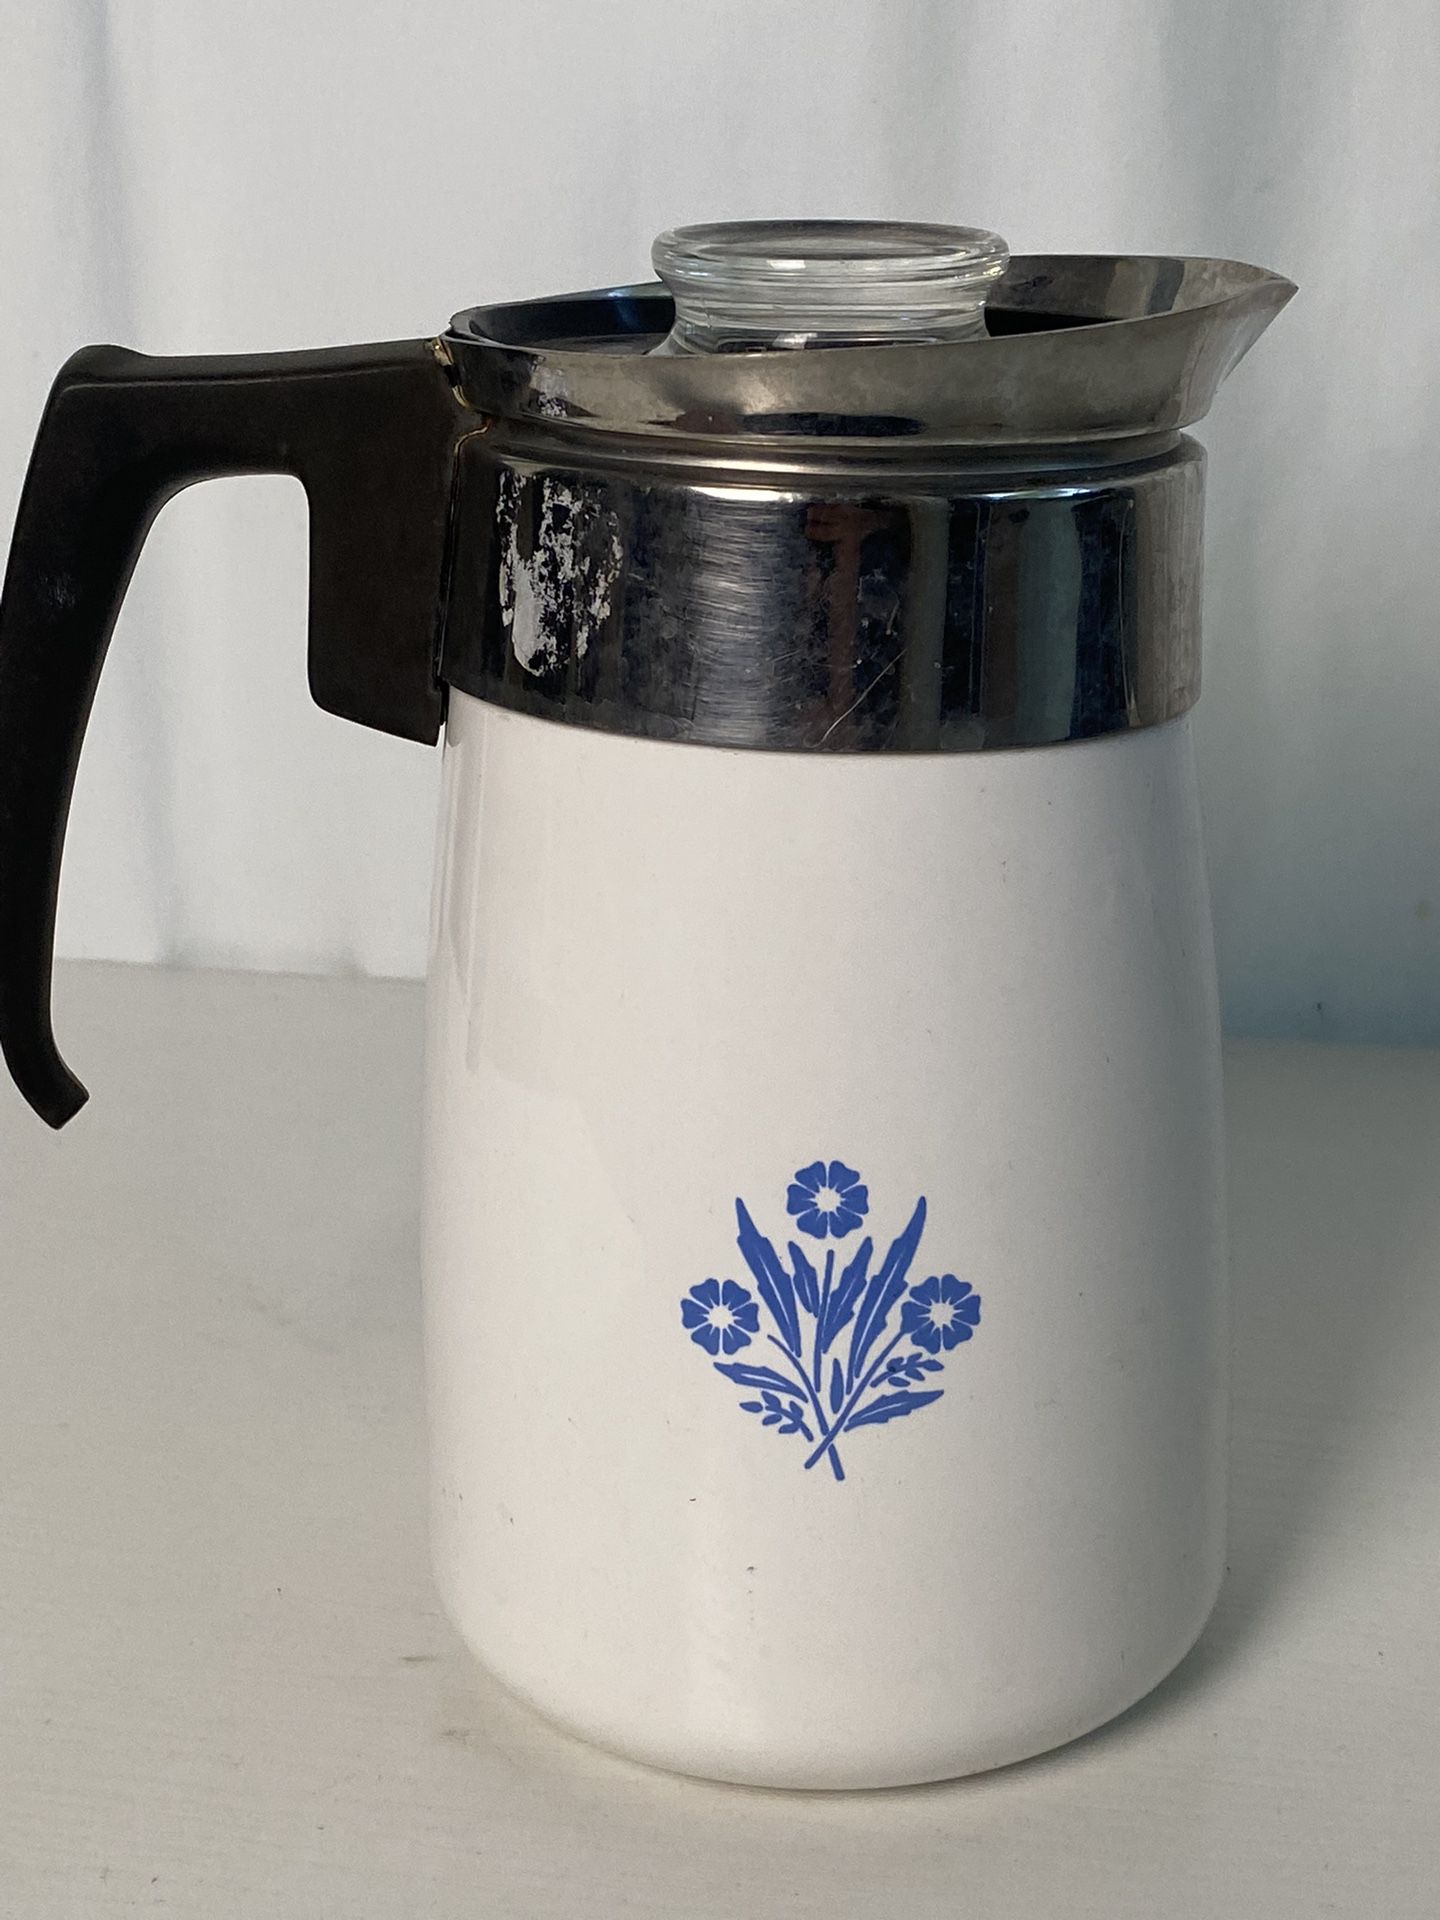 Vintage 1960 Corning Ware Blue Cornflower 6 Cup Coffee Maker Percolator  Glass Knob for Sale in Los Angeles, CA - OfferUp